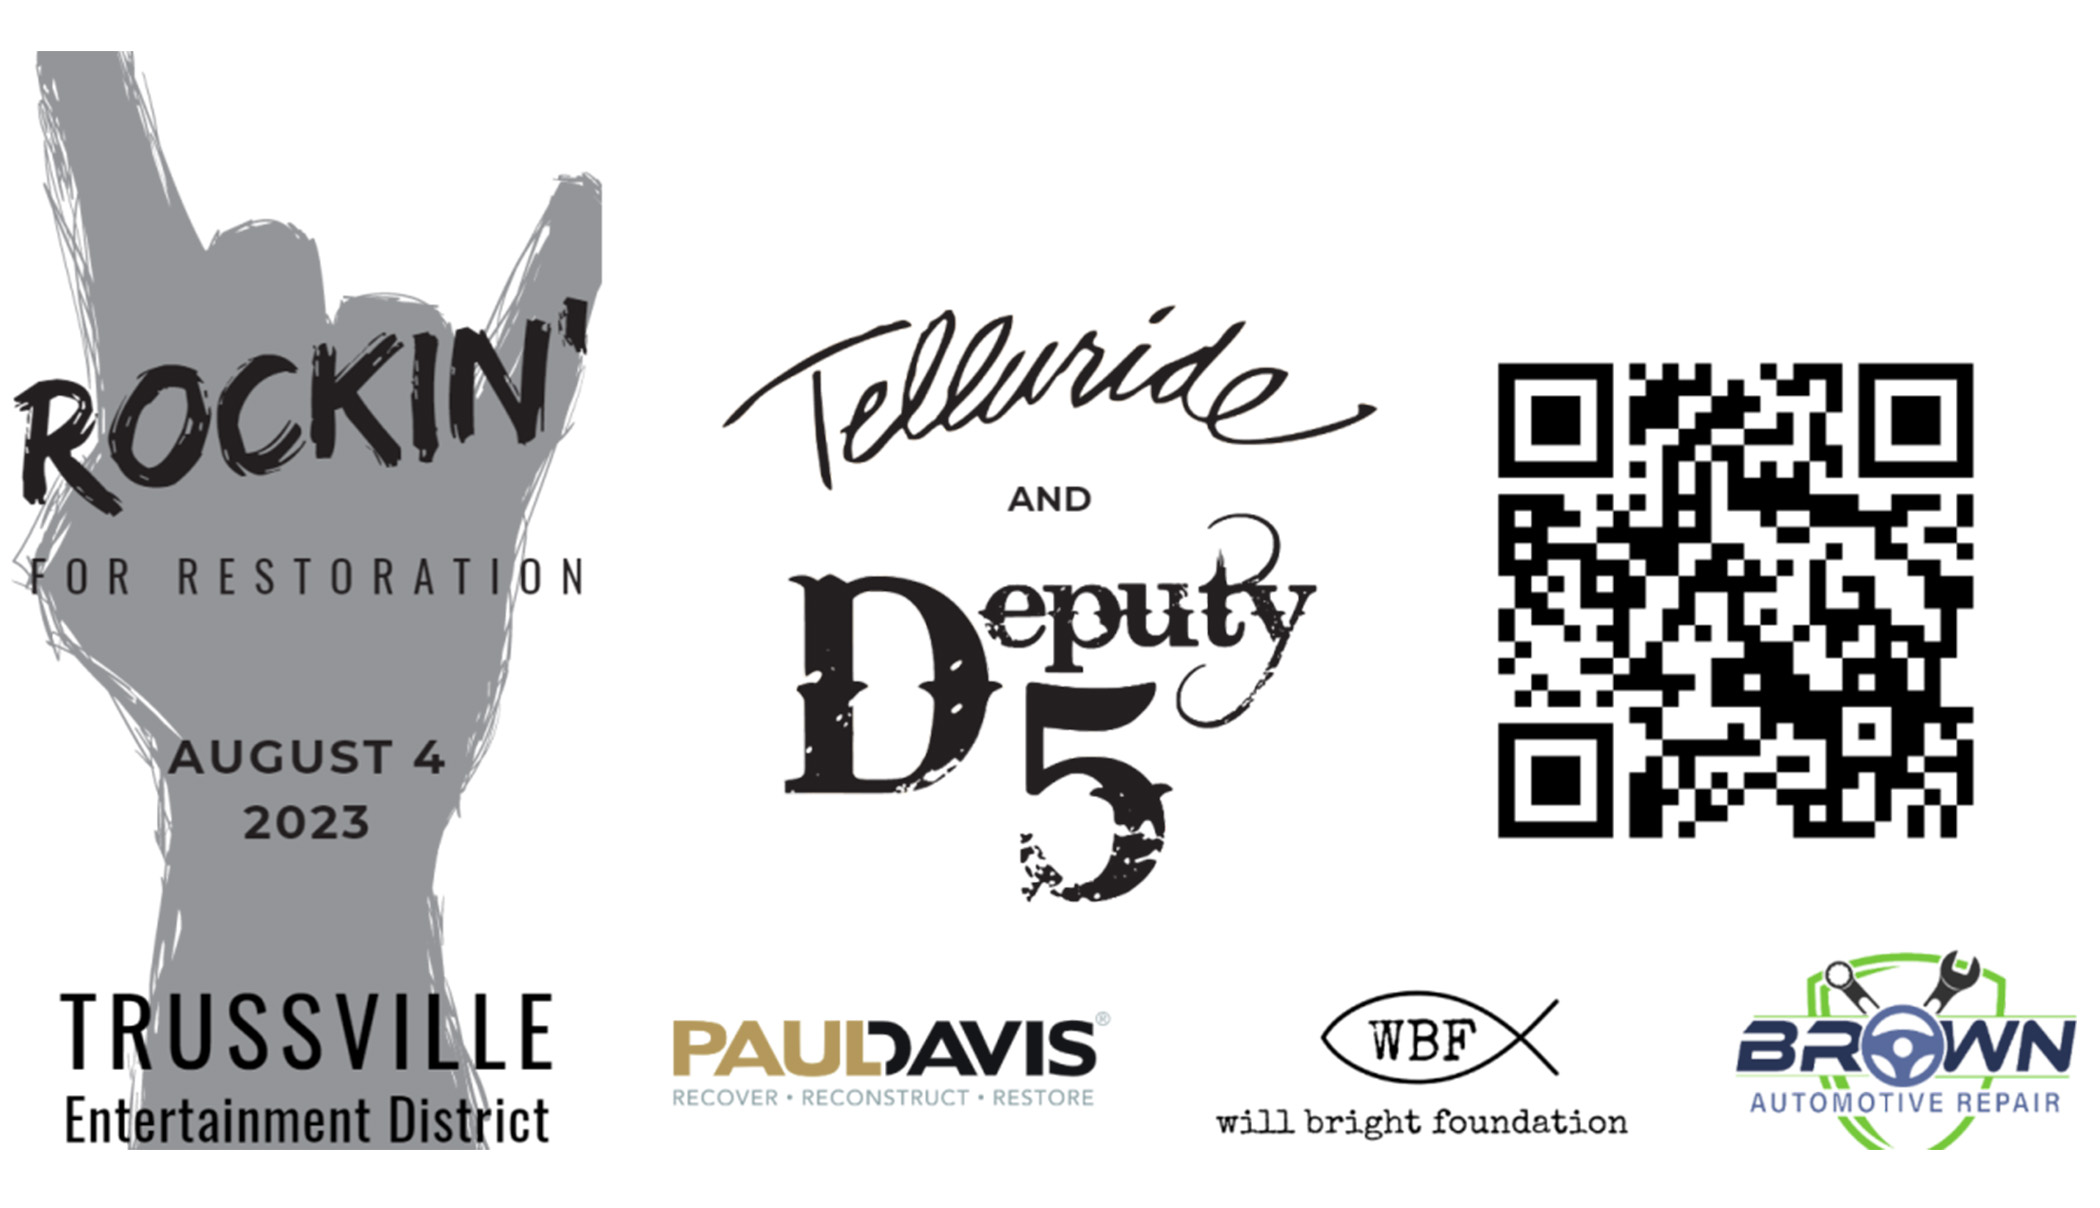 Rockin’ For Restoration addiction recovery event to be held at the Trussville Entertainment District in August